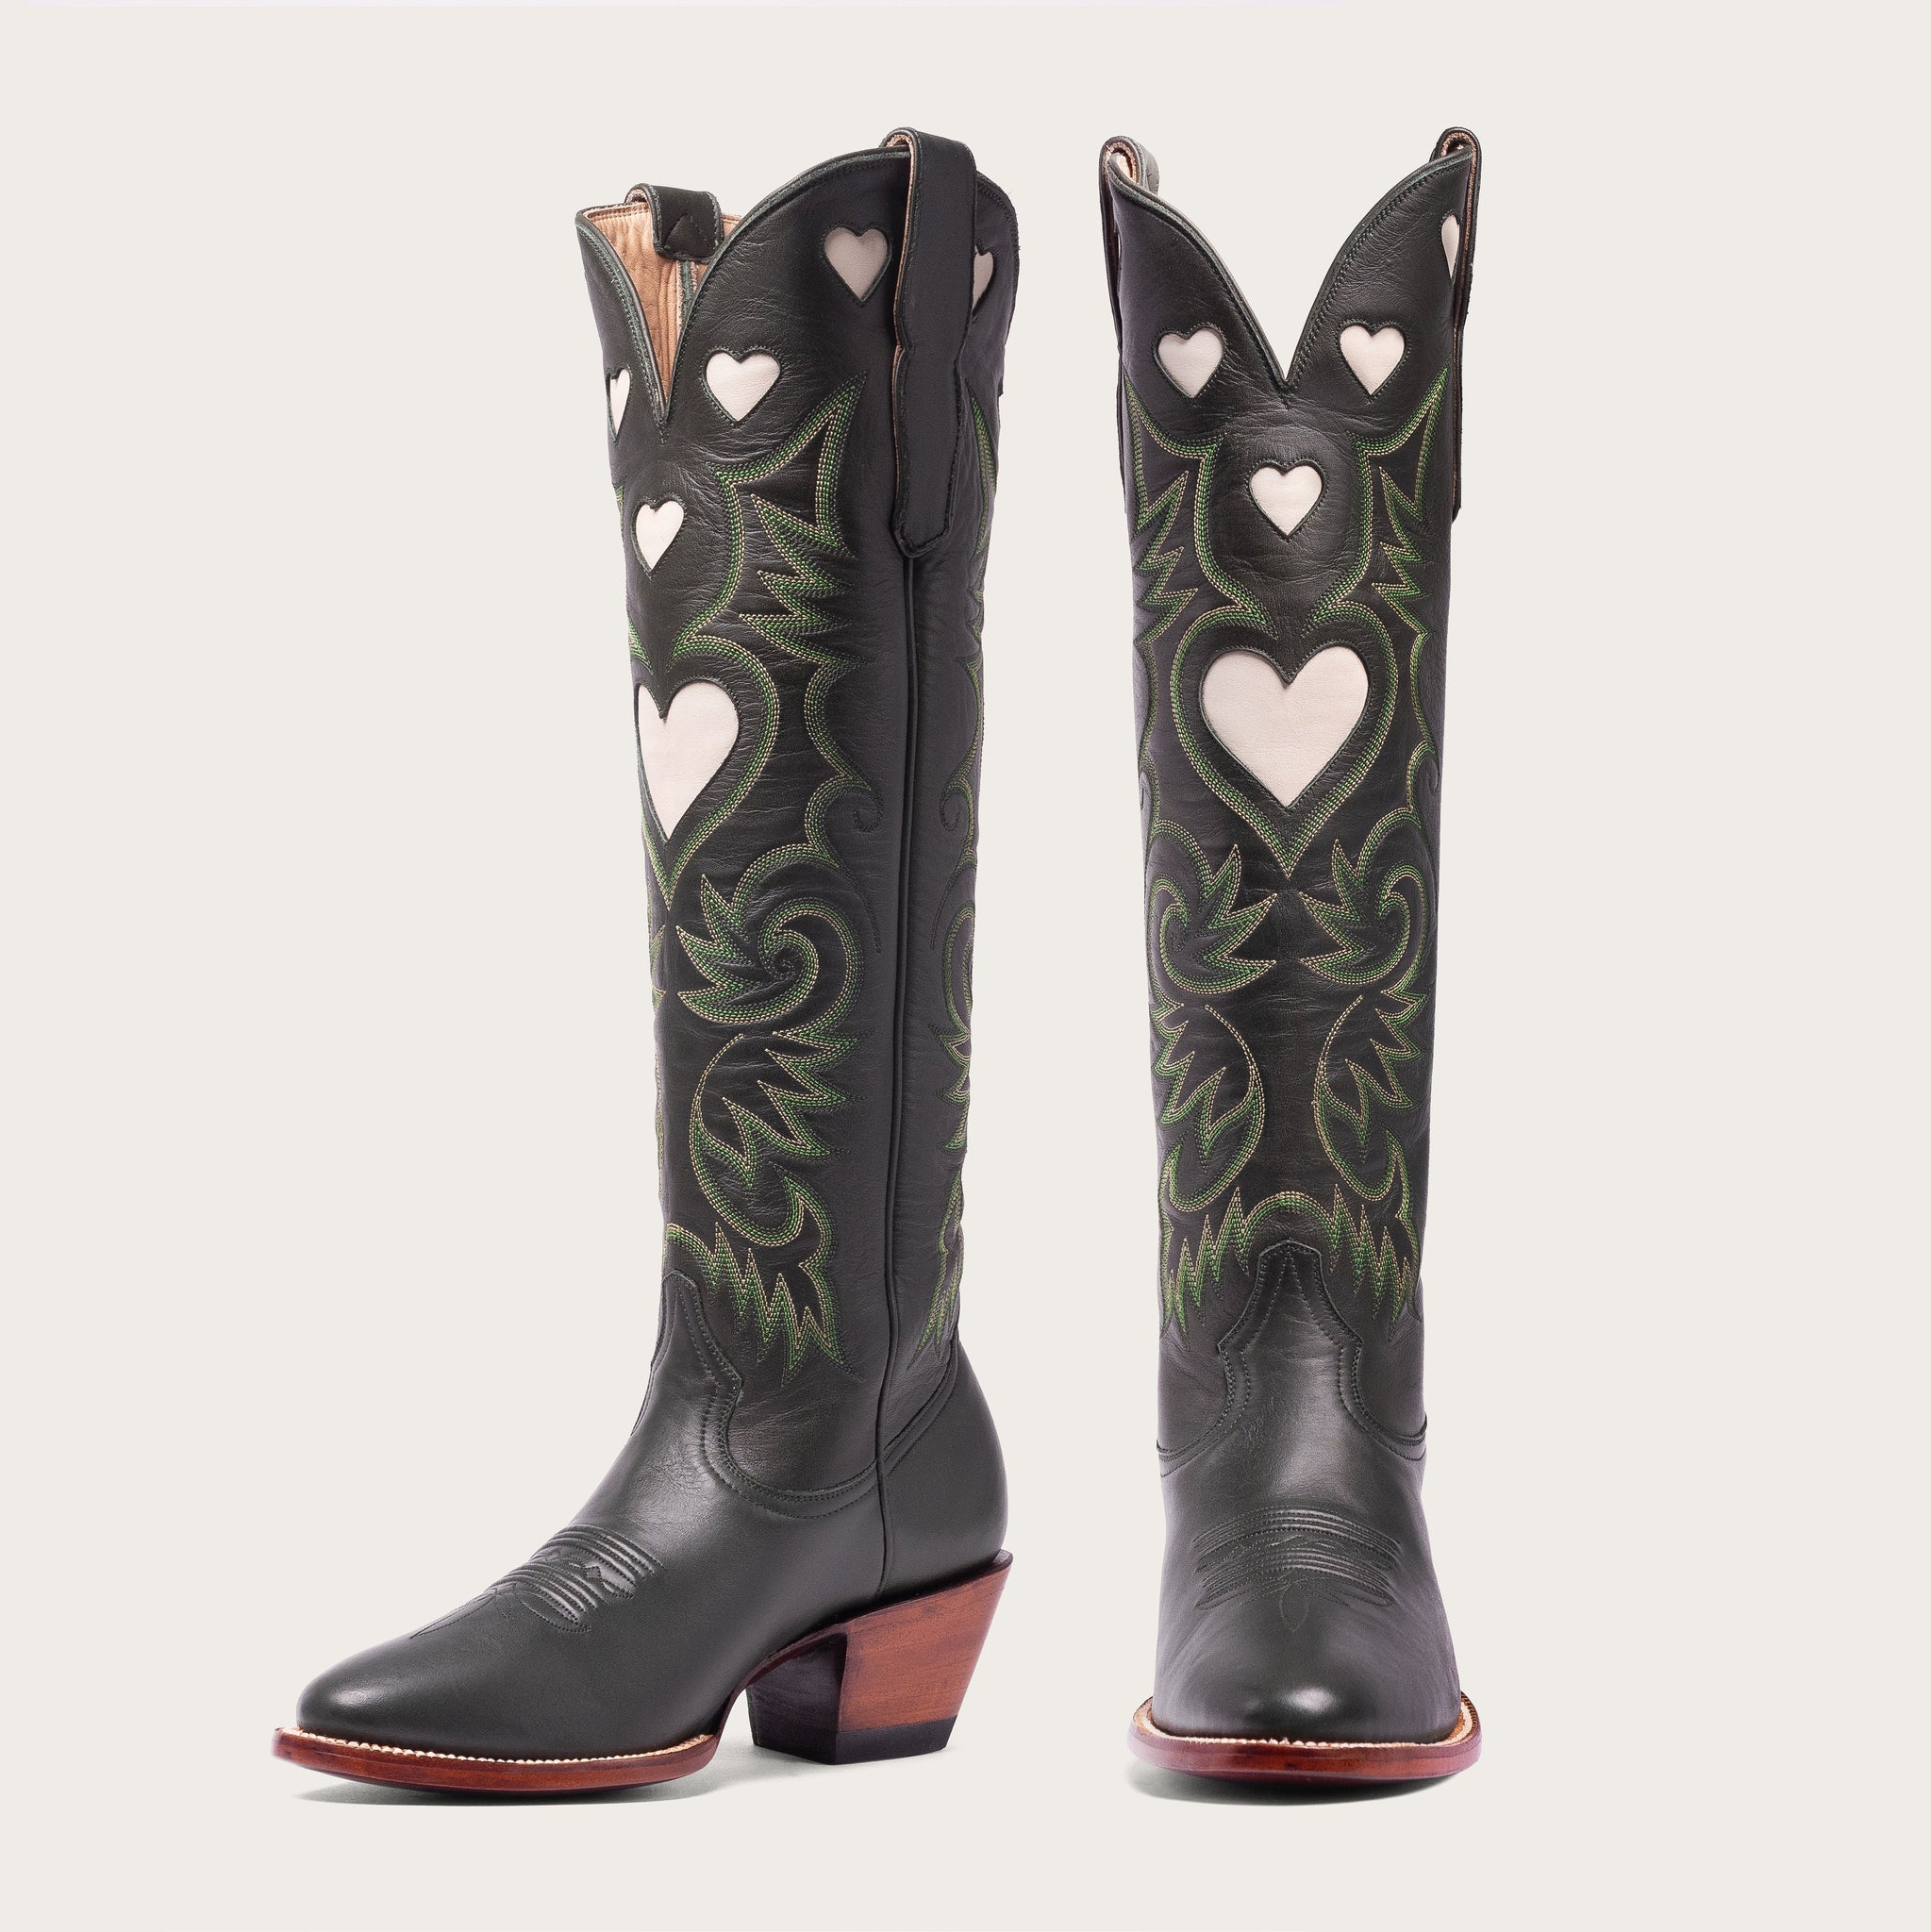 Green & Bone Heart Boot Limited Edition - CITY Boots